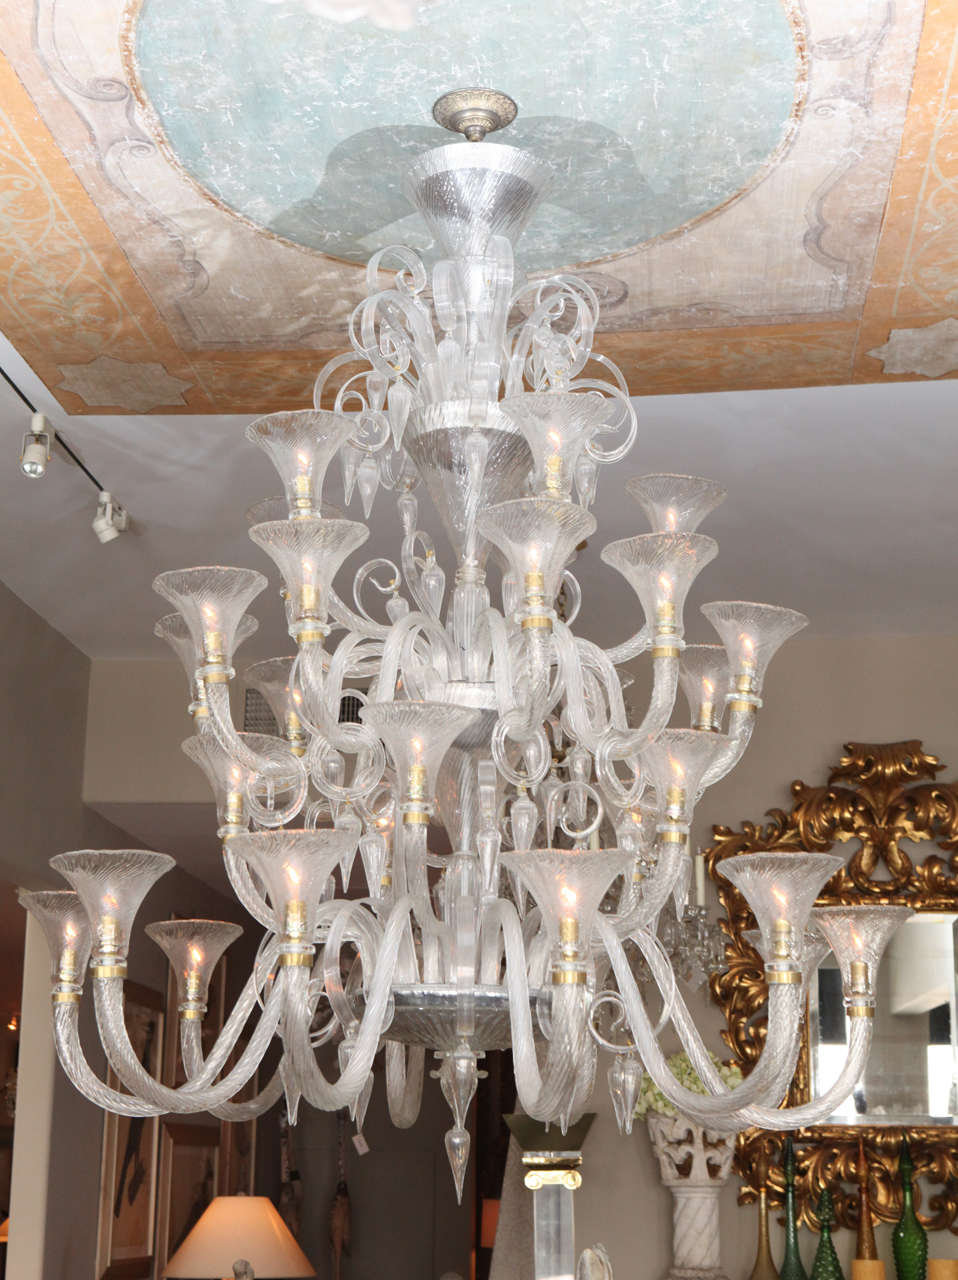 Monumental sized Murano Glass Chandelier, 30 Light.
PLEASE NOTE: Parcel Delivery is not an option for this item. White Glove or Front Door Freight required.